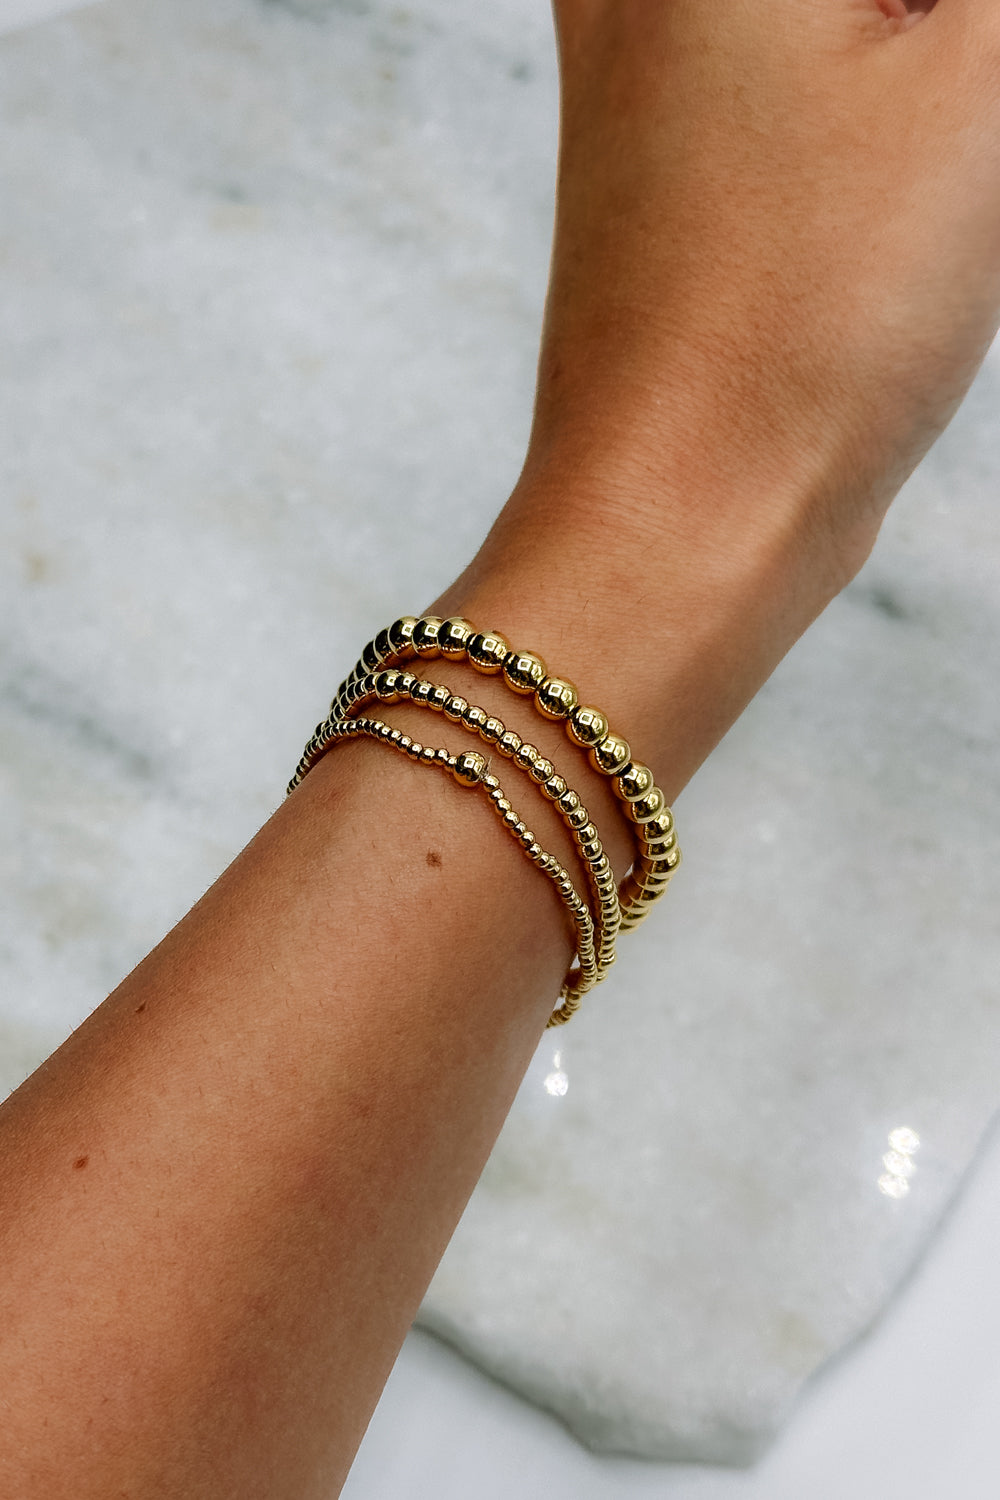 Image shows Jane Gold 2mm Beaded Water Resistant Bracelet on model's wrist with two other bracelets.